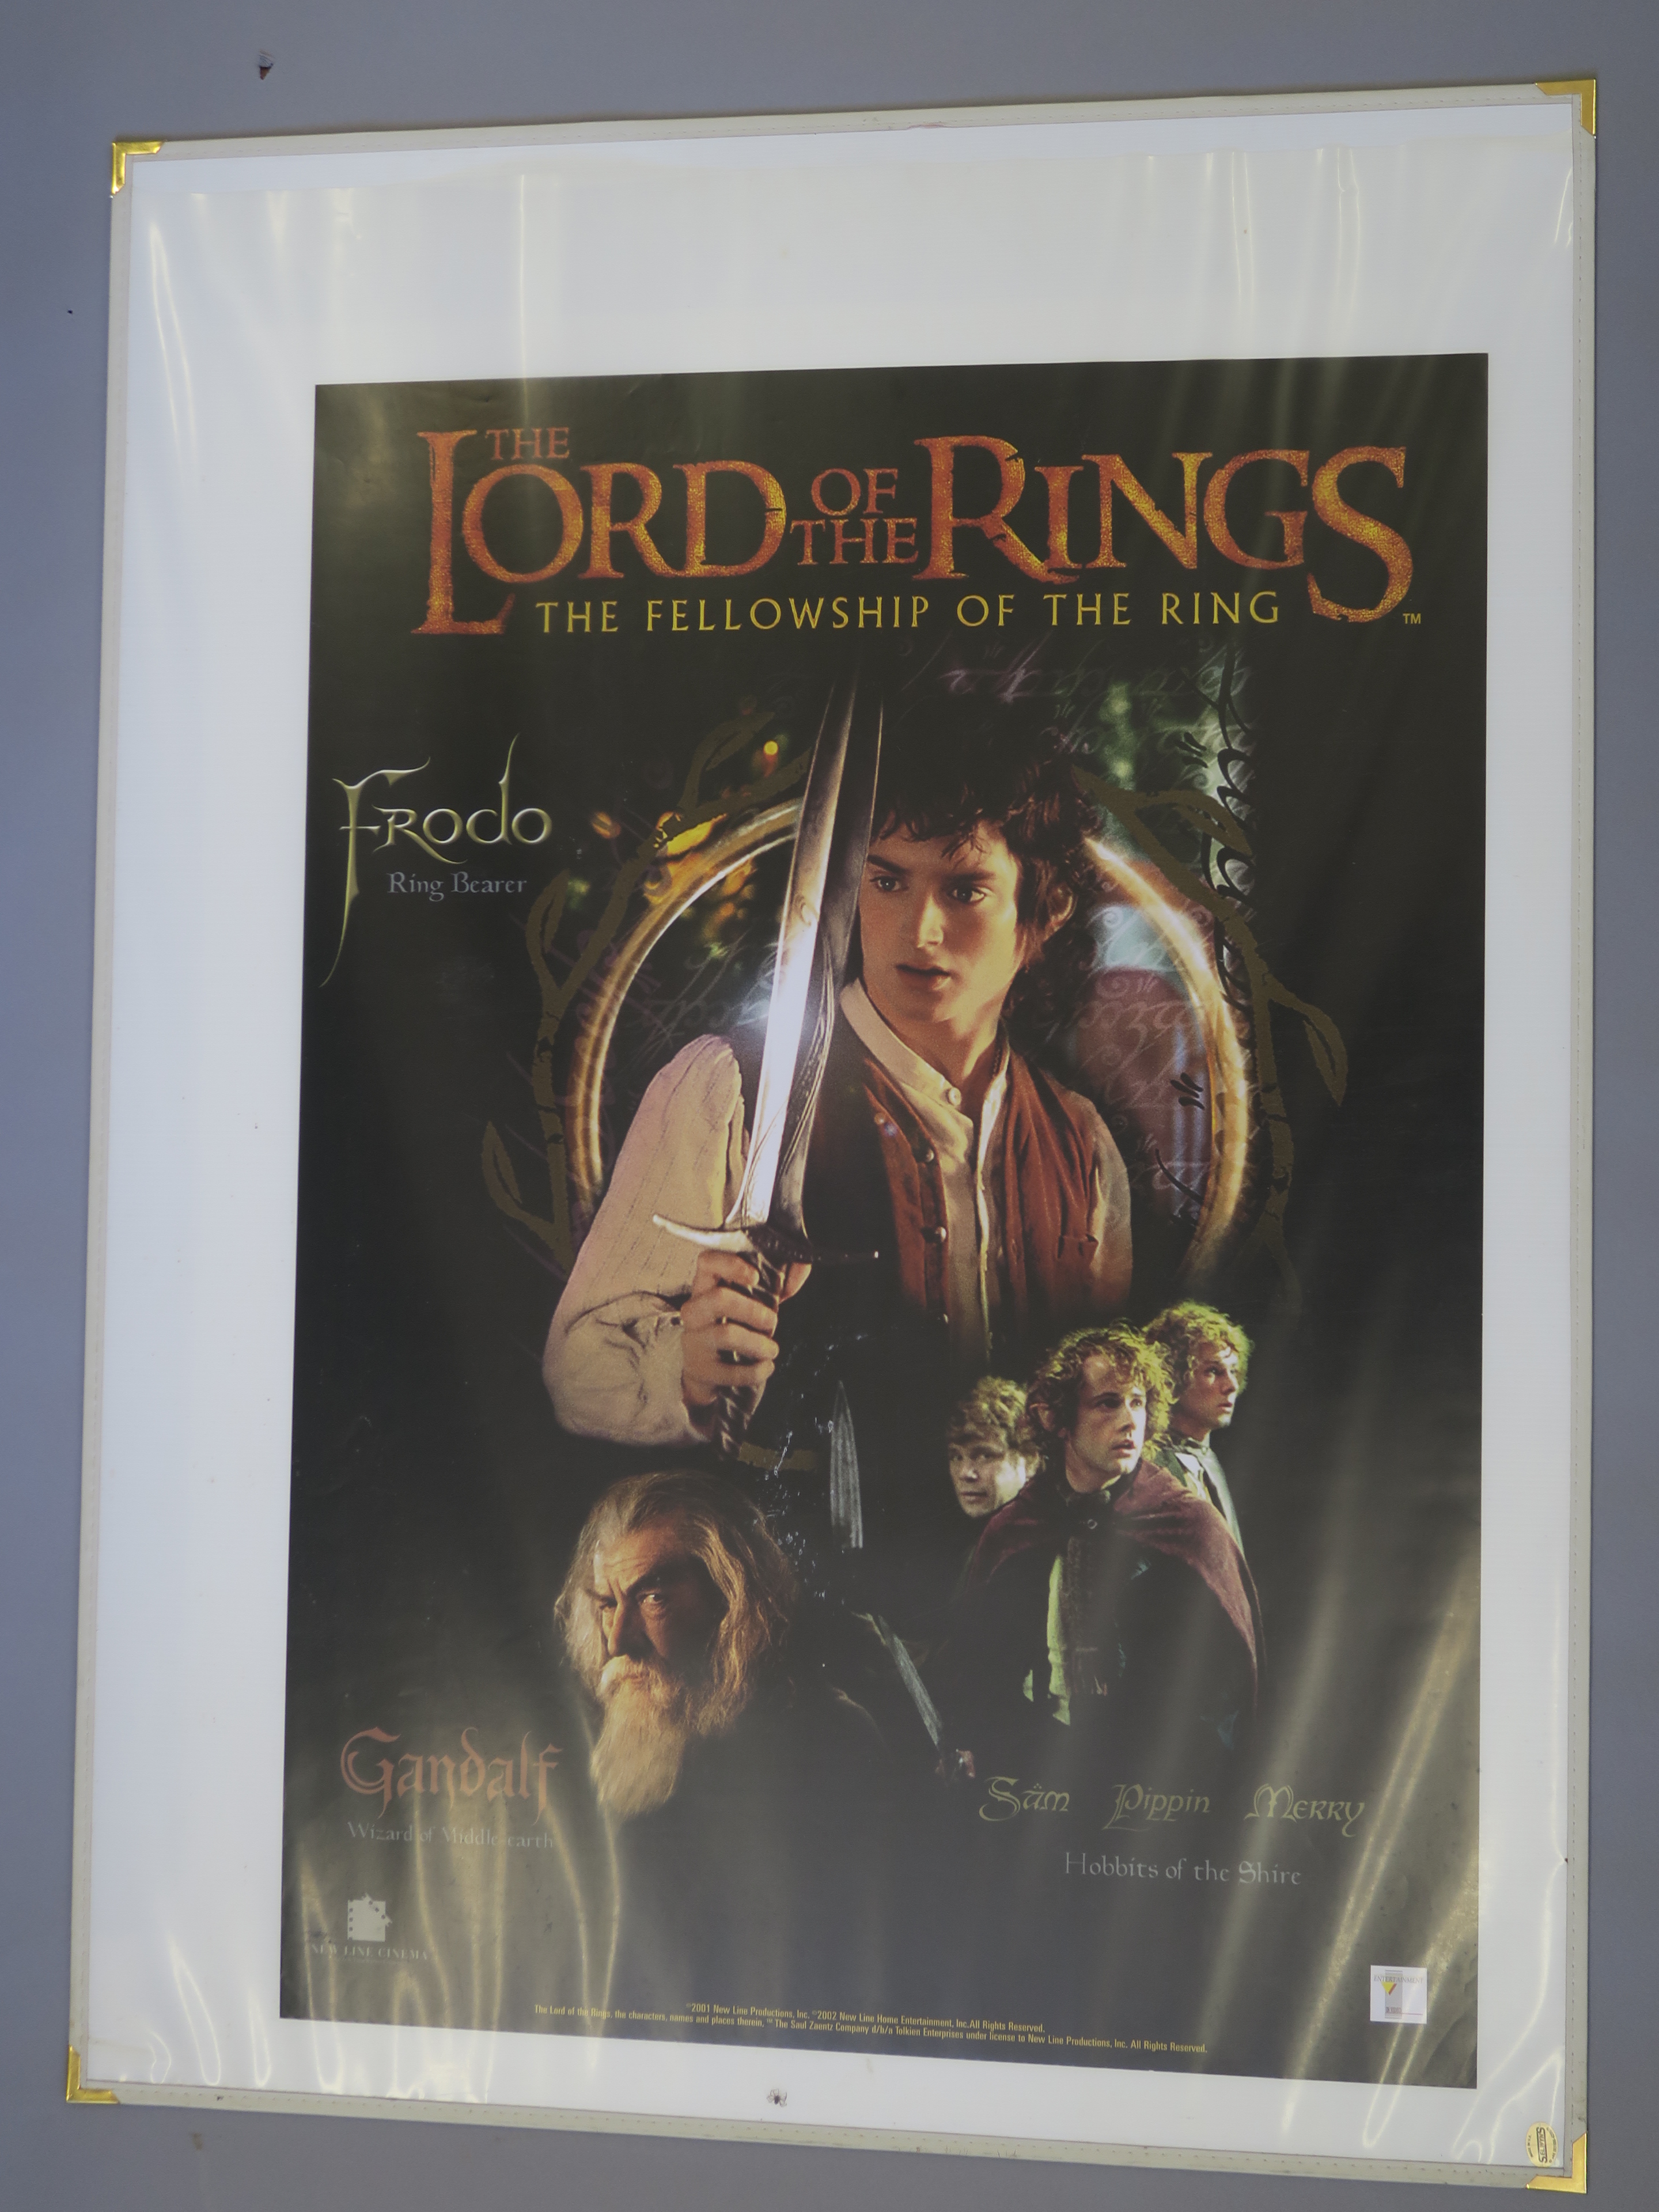 10 Selwyn browsers 30 x 40 inch for one sheets inc posters for Lord of the Rings, Flash Gordon,